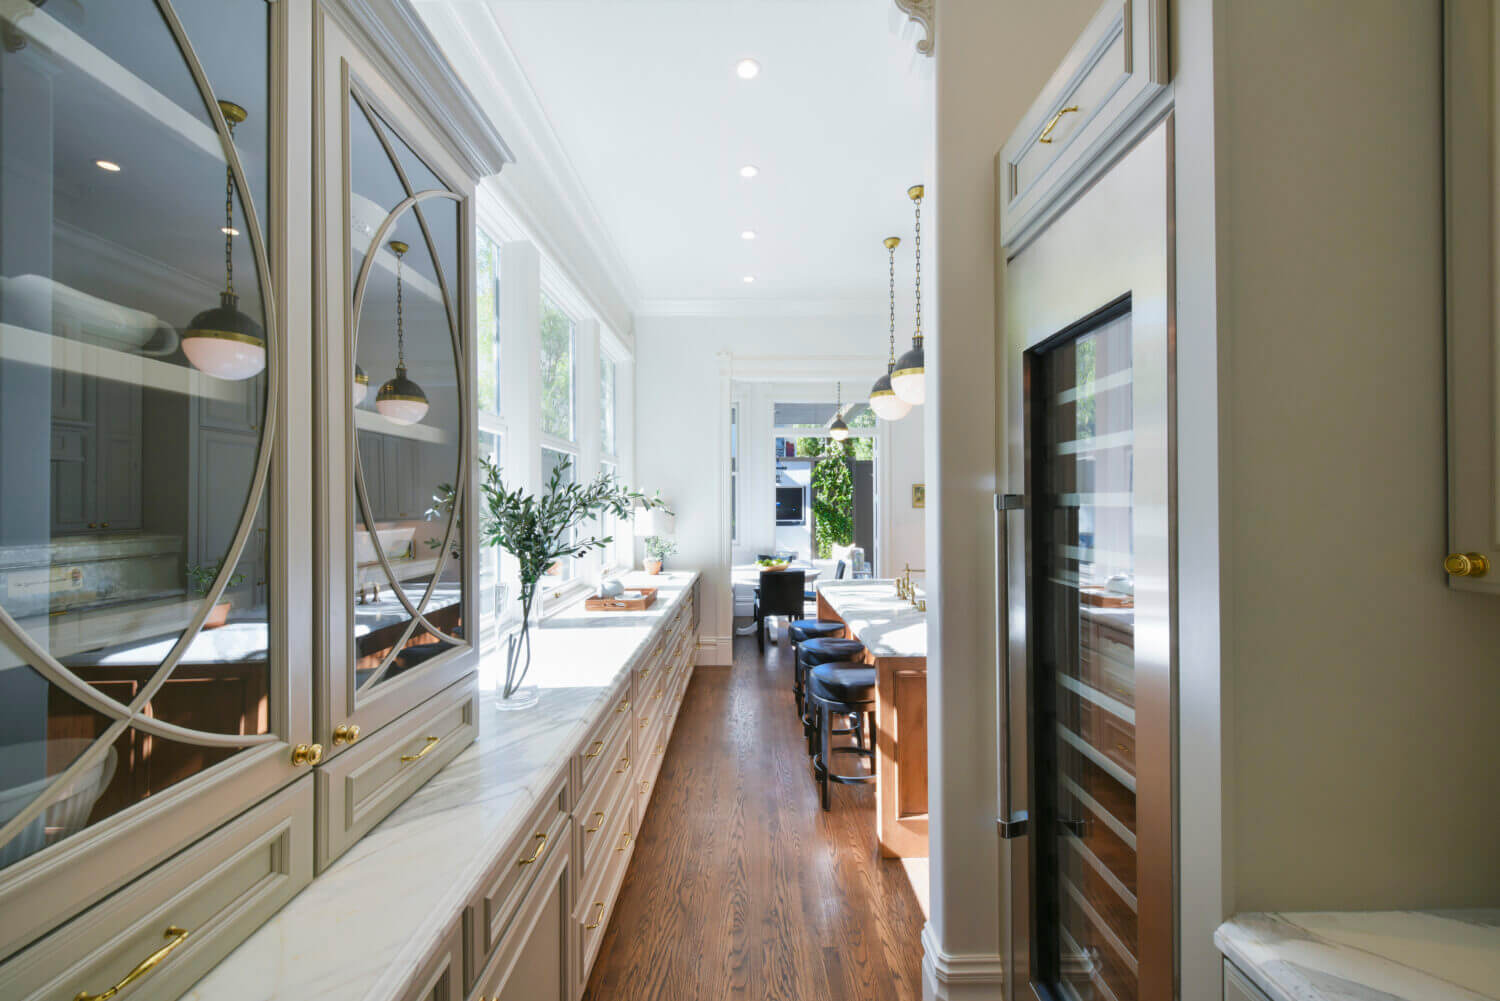 A galley kitchen design with elegant glass cabinet doors with a light gray painted finish.